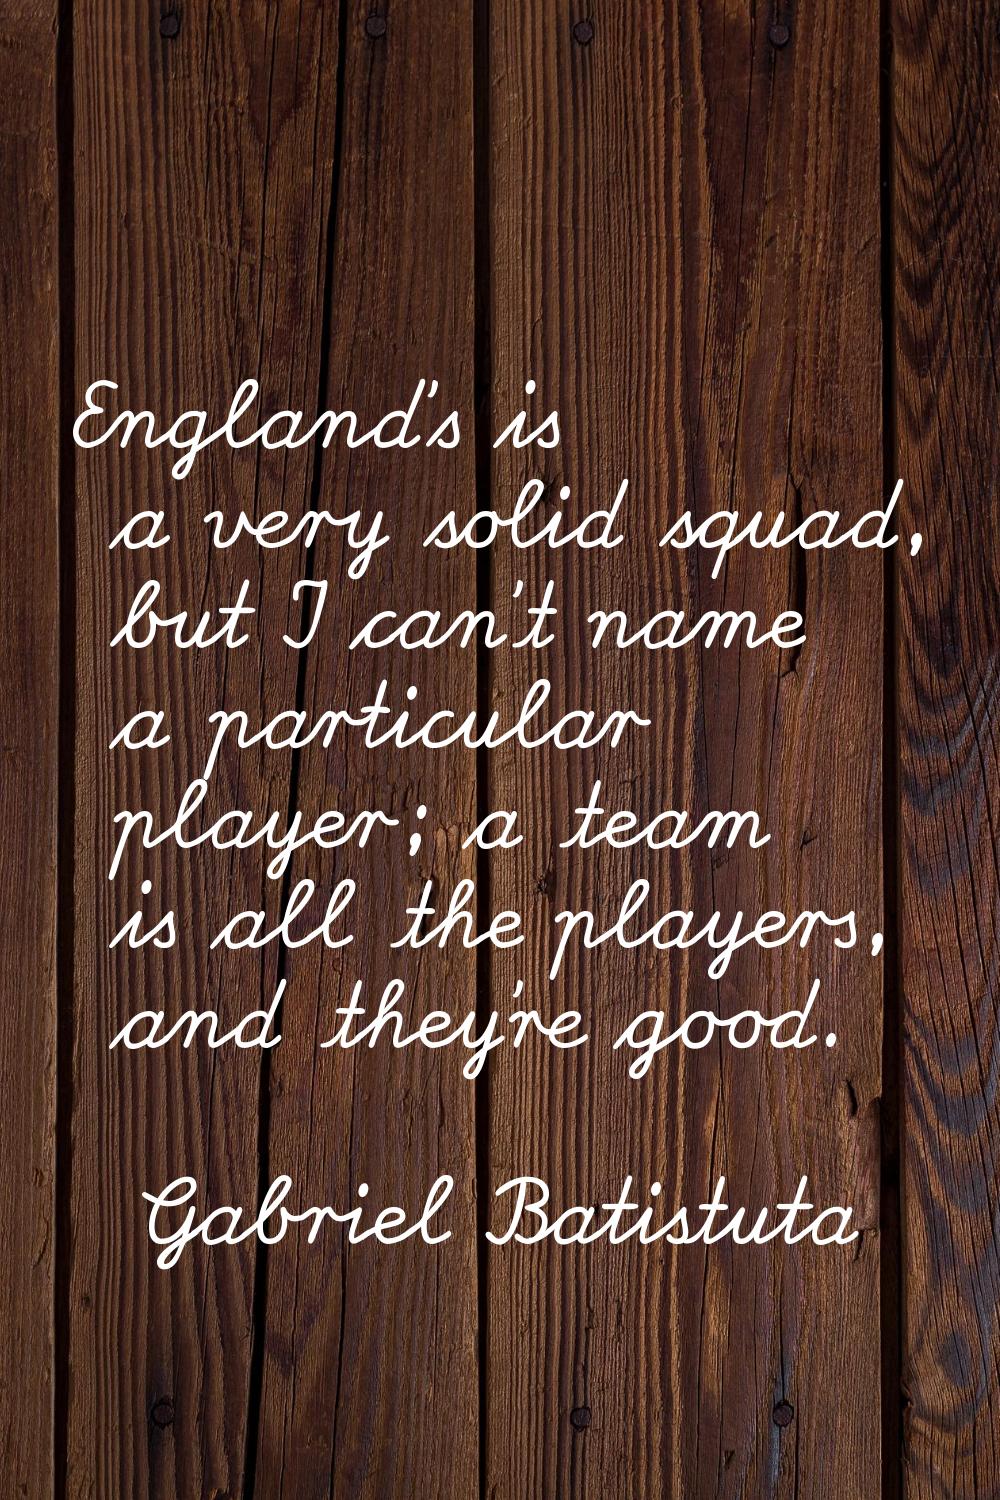 England's is a very solid squad, but I can't name a particular player; a team is all the players, a